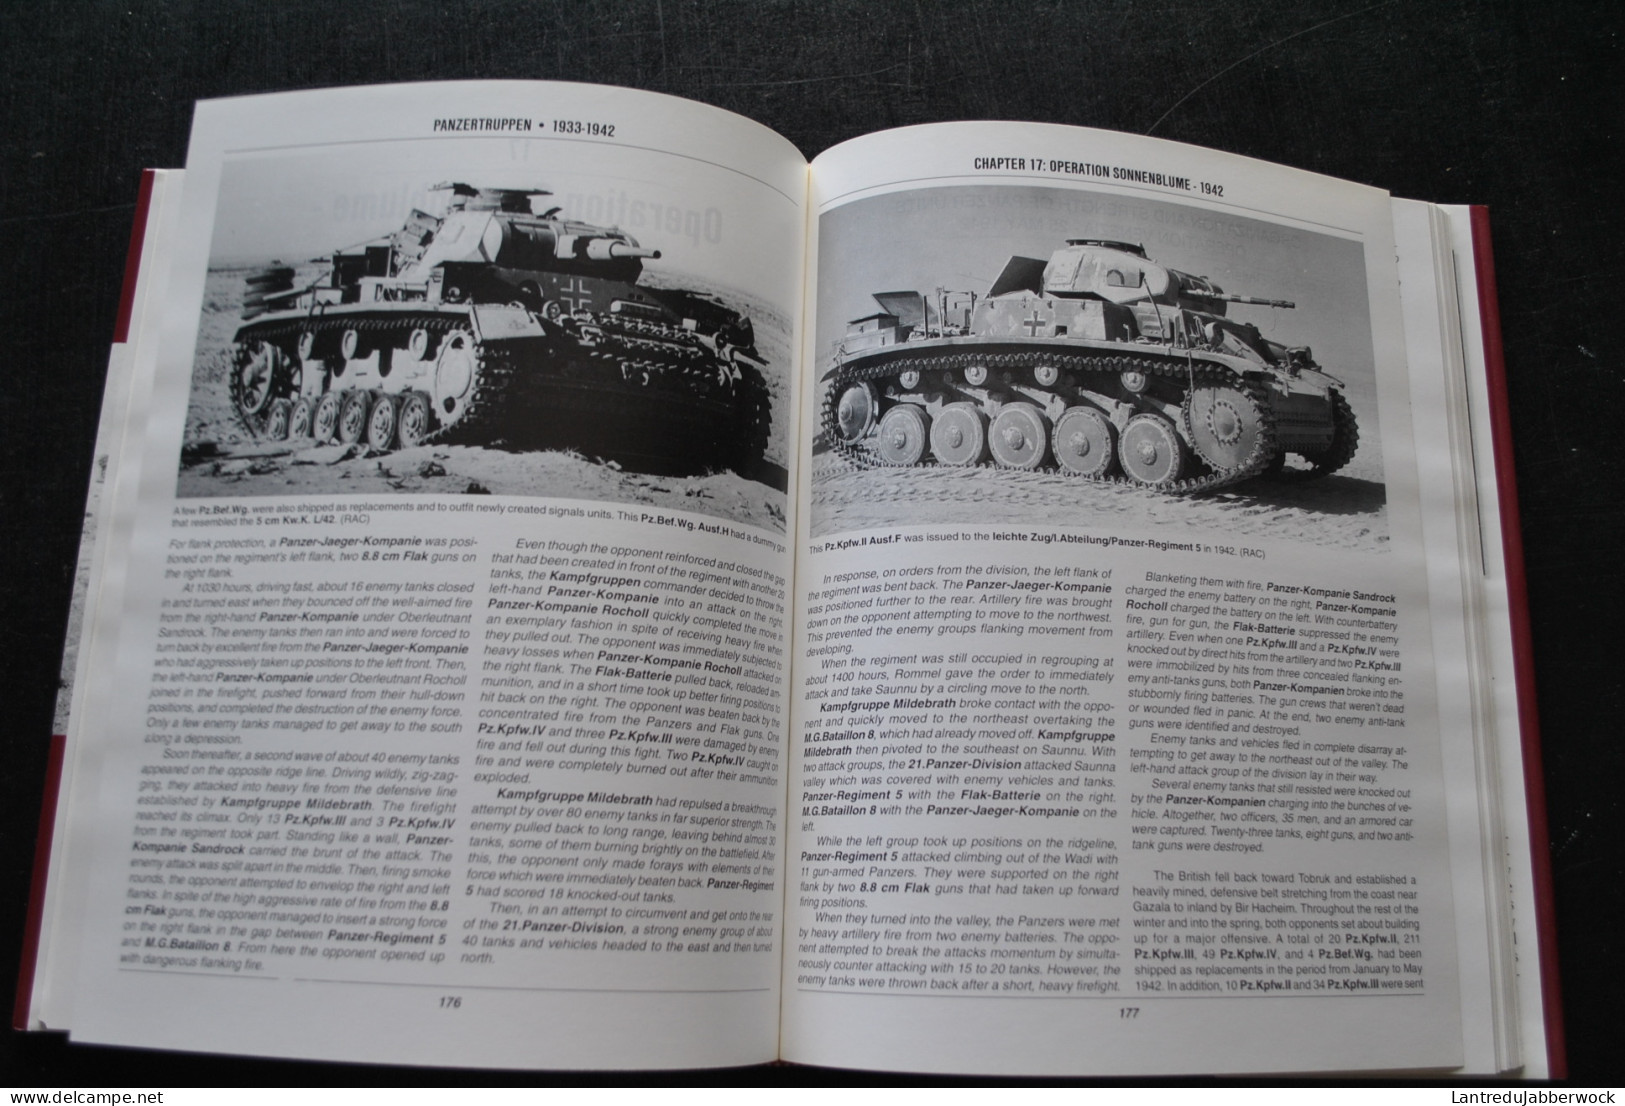 PANZER TRUPPEN VOL. 1 THE COMPLETE GUIDE TO THE CREATION & COMBAT EMPLOYMENT OF GERMANY'S TANK FORCE 1933-1942 RARE